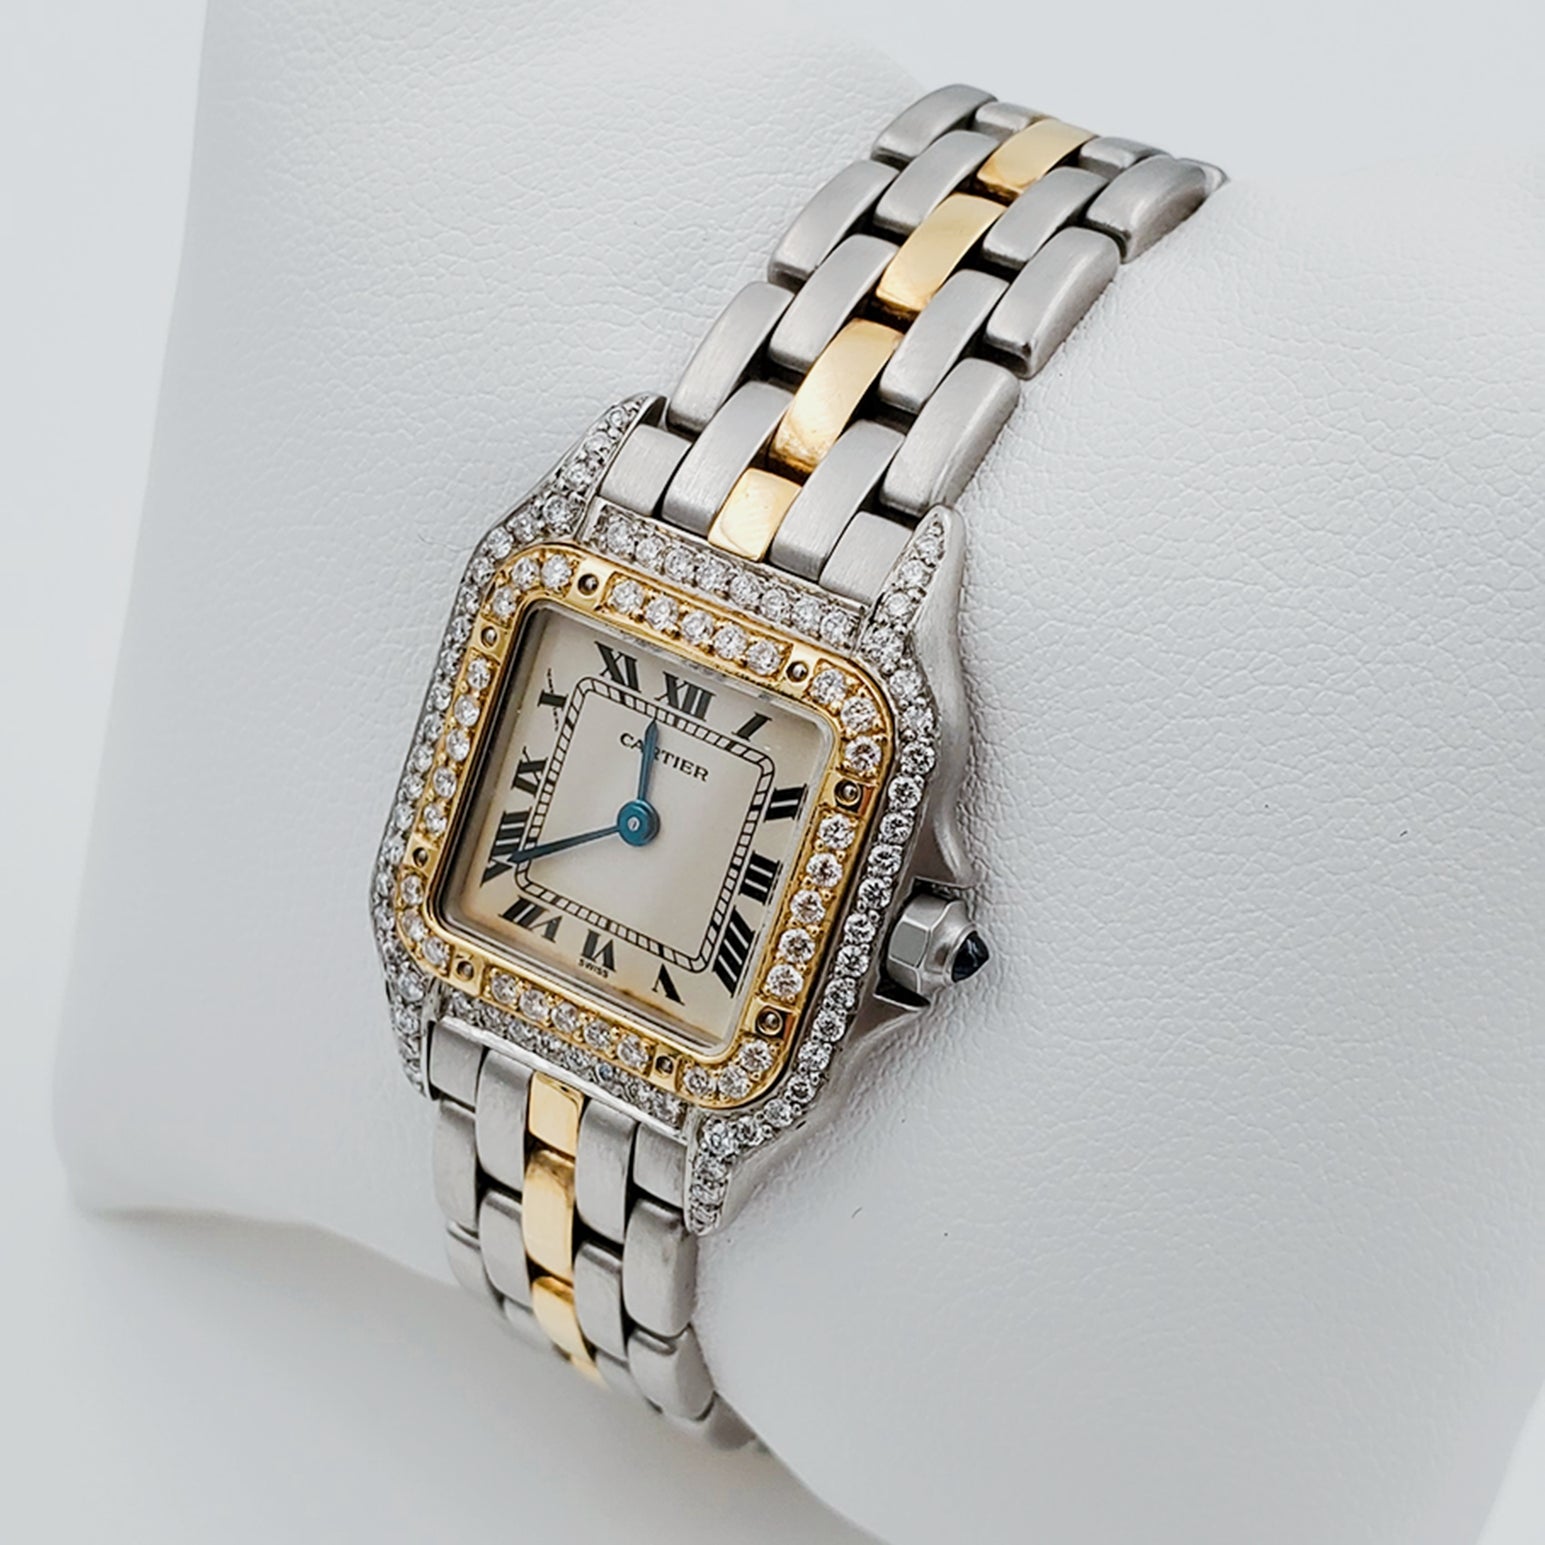 Ladies Small Cartier Panthere Watch in 18K Yellow Gold / Stainless Steel with Diamond Bezel and White Dial. (Pre-Owned)